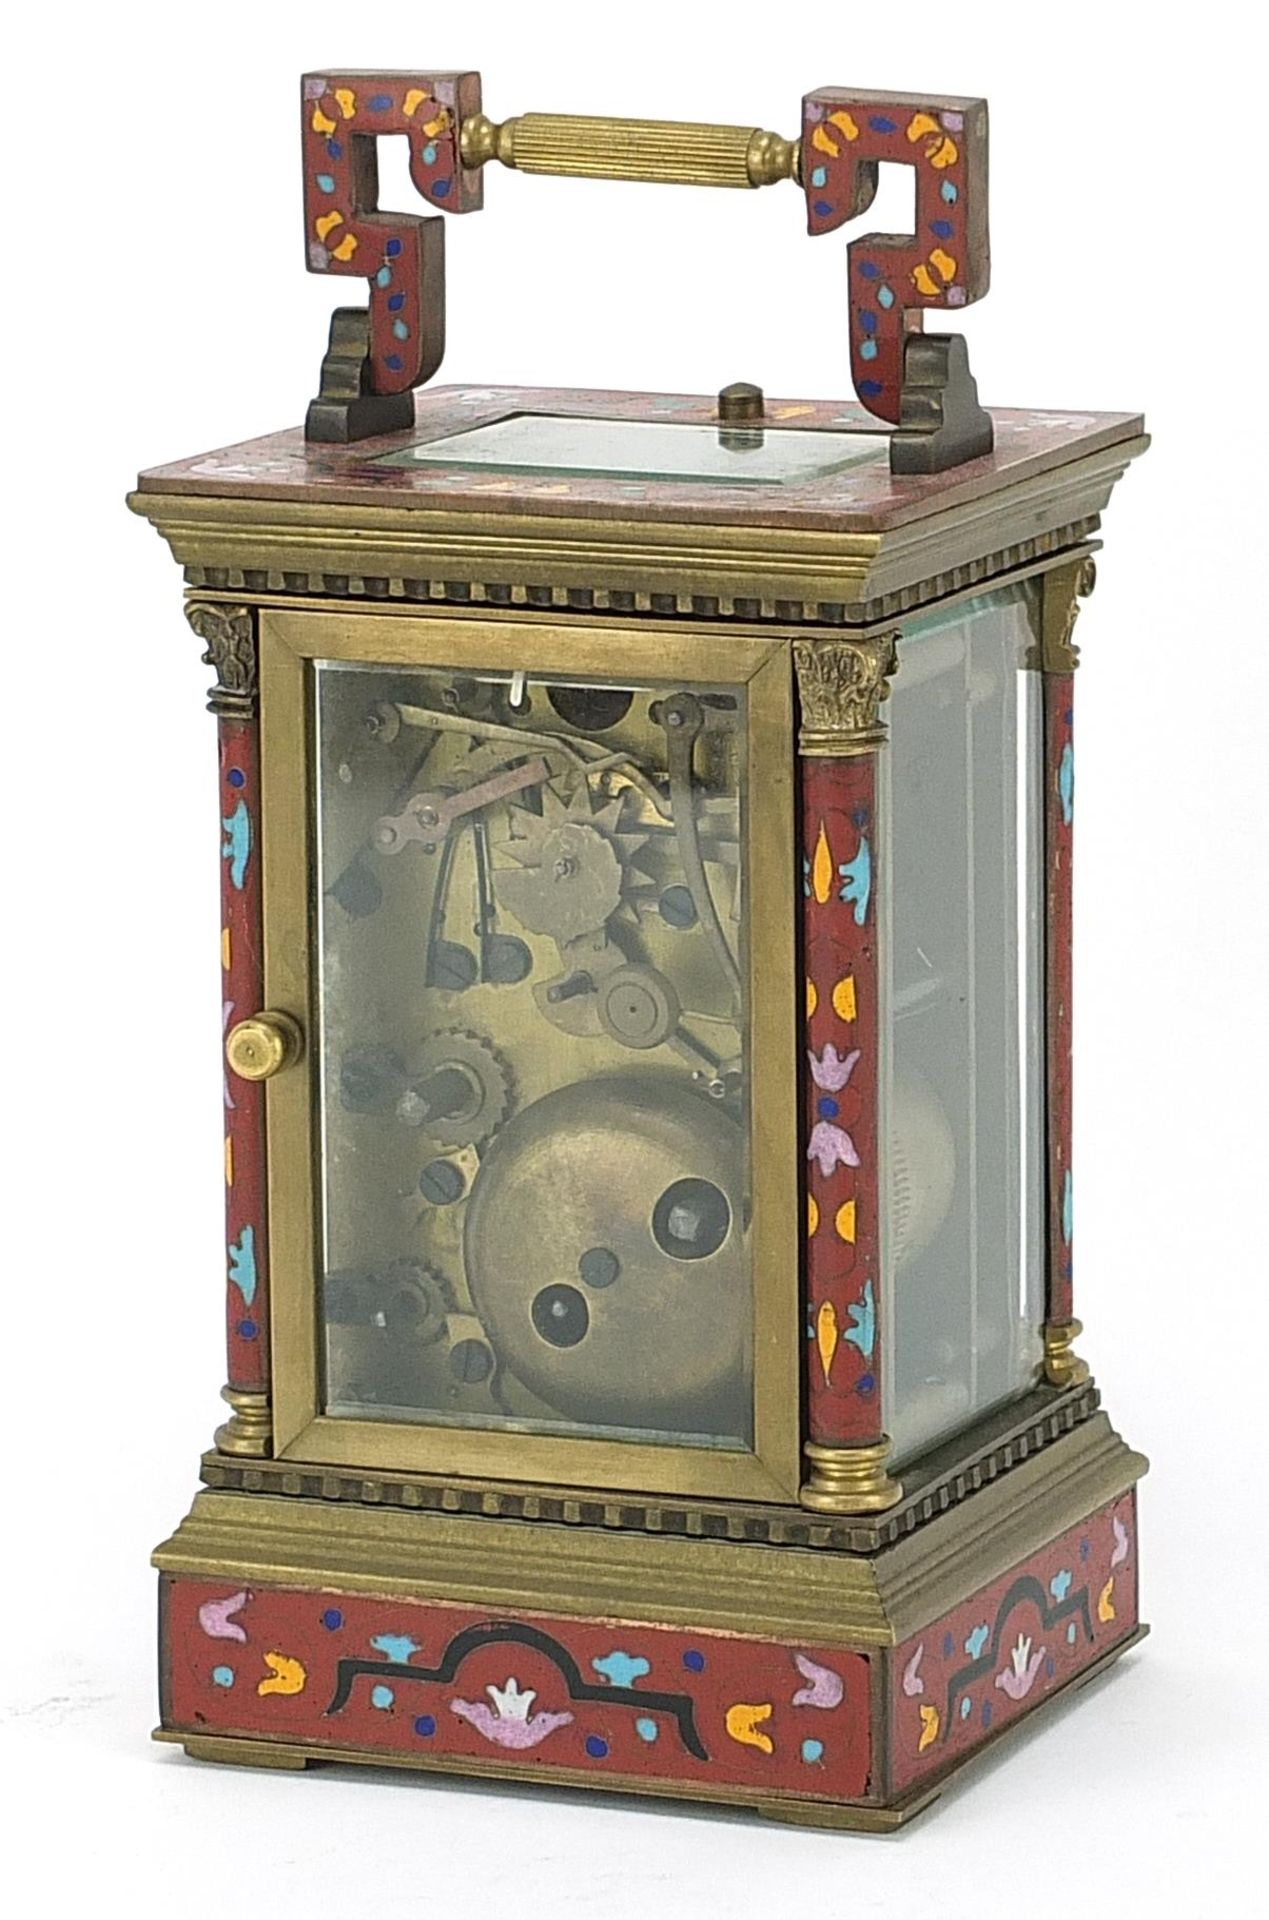 Champleve enamel brass repeating carriage clock with subsidiary dial, 16.5cm high - Image 2 of 4